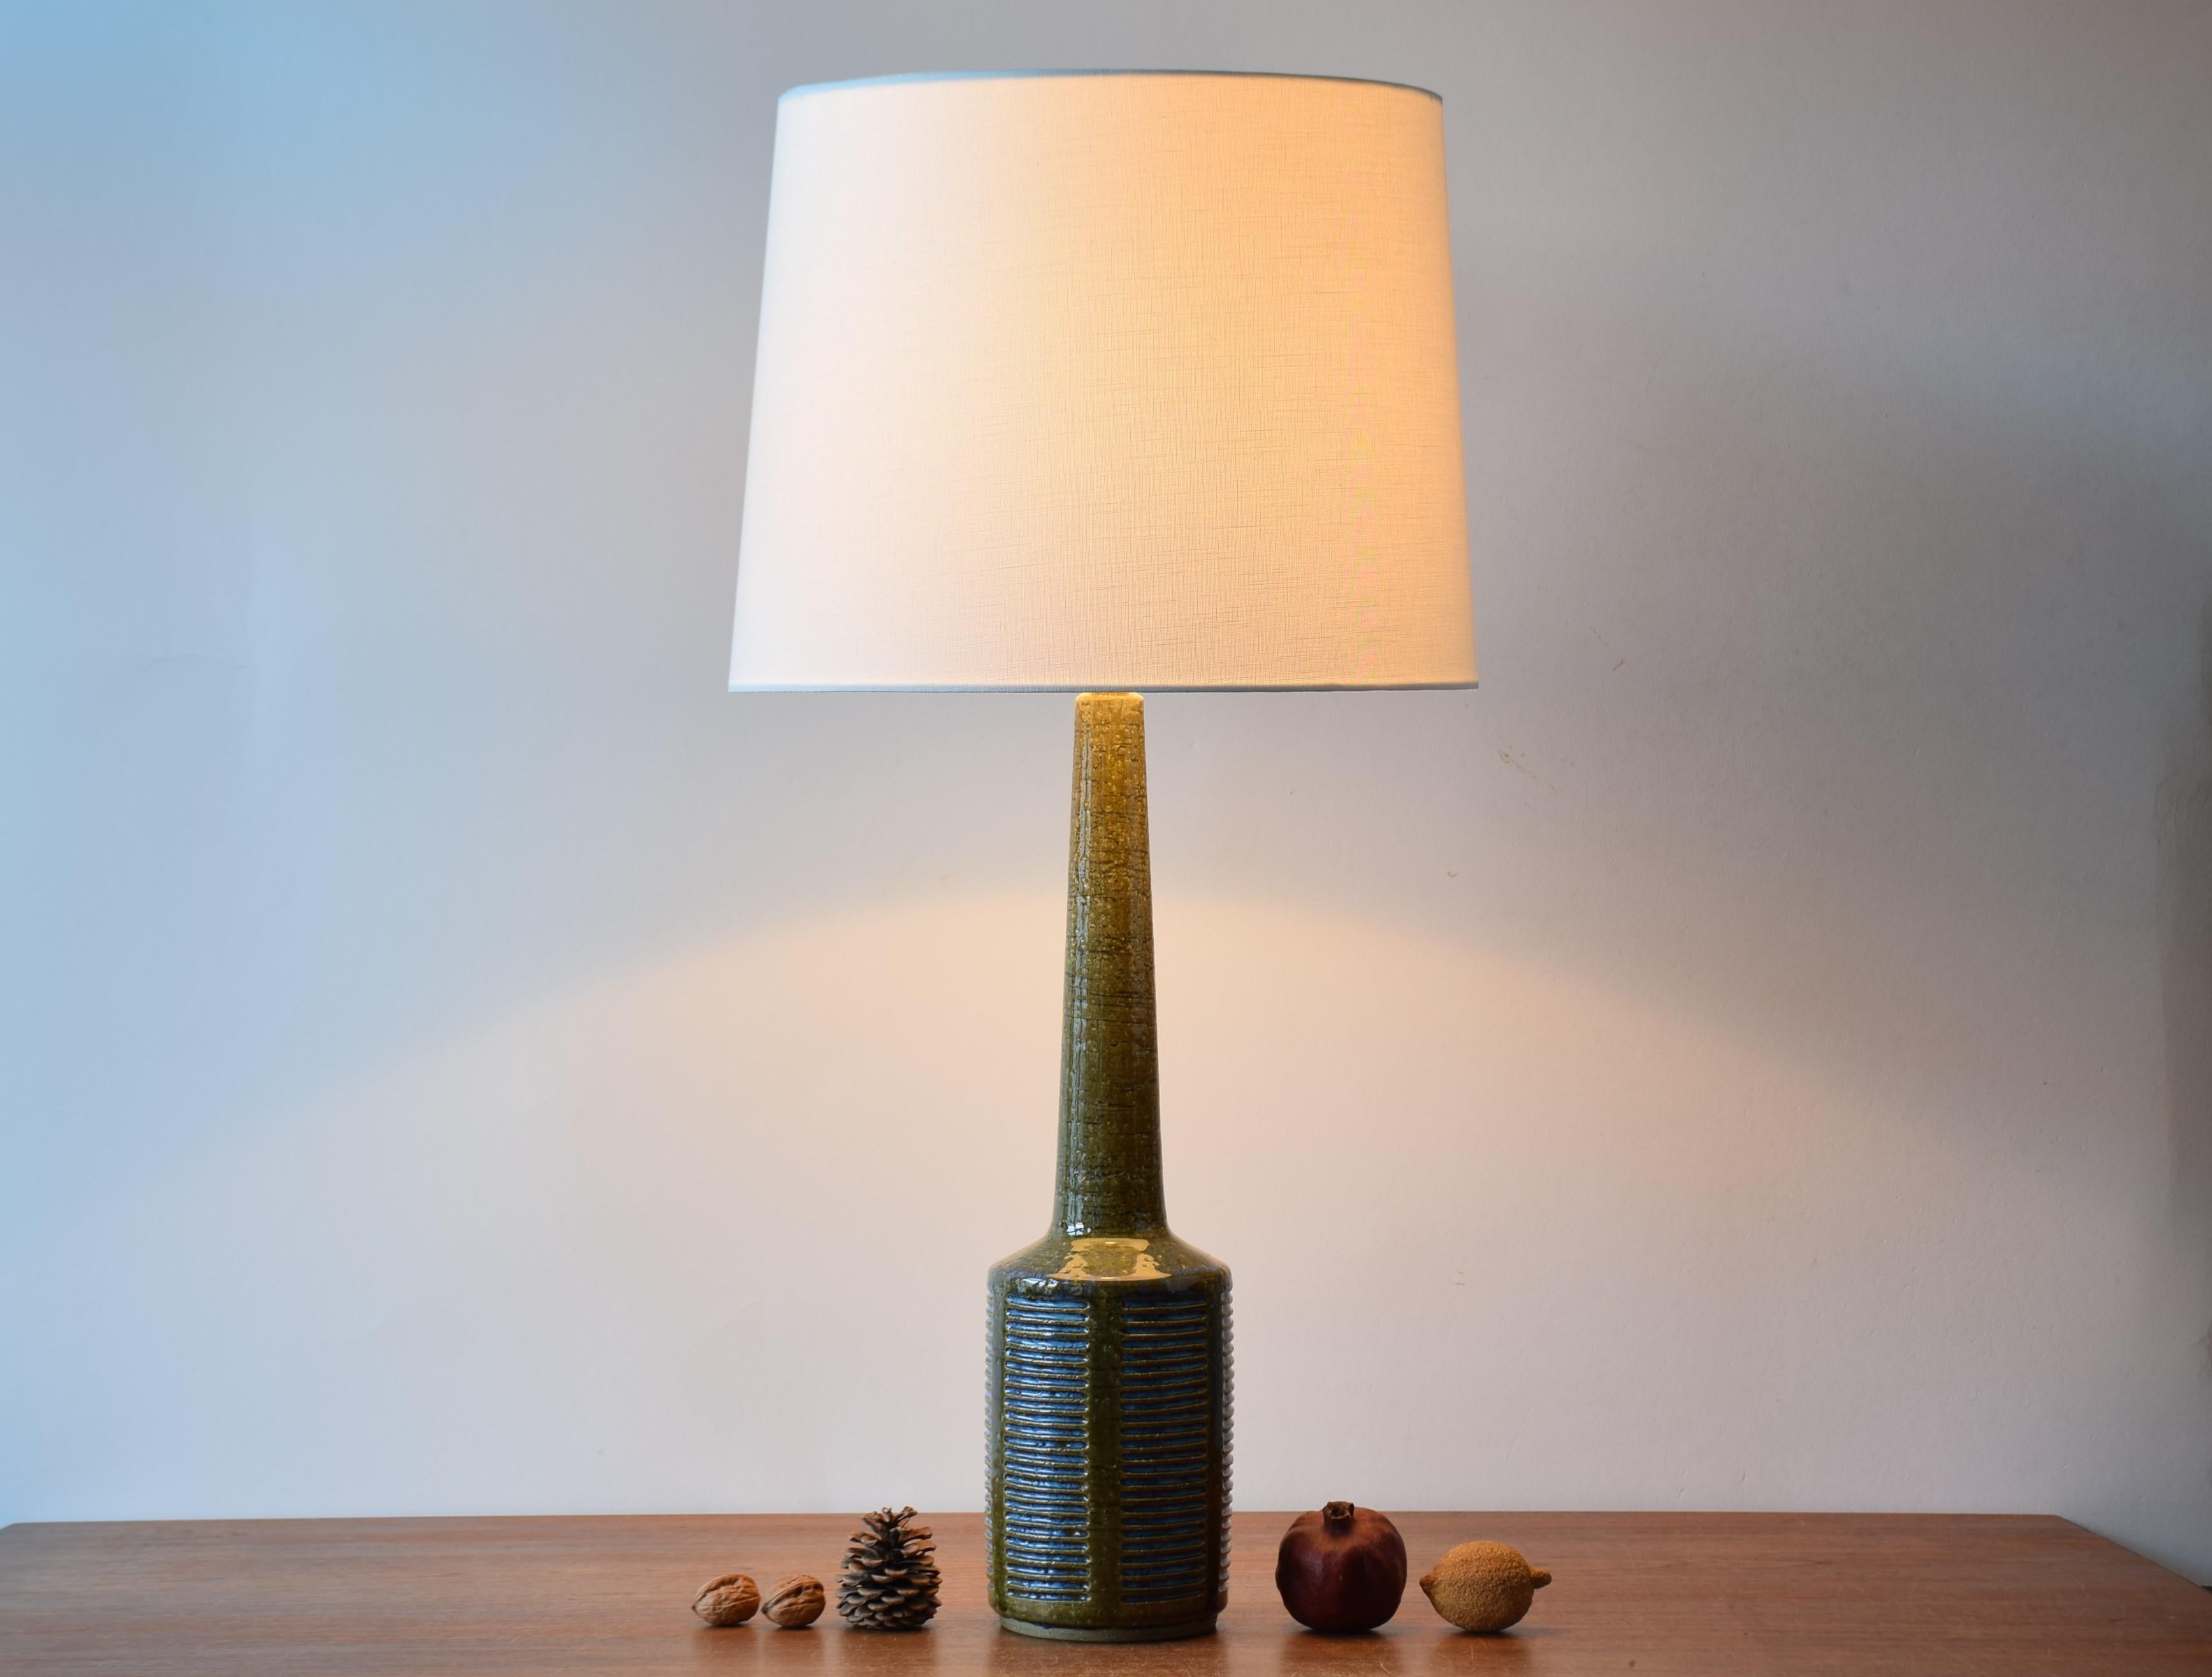 Very tall midcentury table lamp from Danish Palshus.
The lamp was designed by Per Linnemann-Schmidt and produced, circa 1960s.
It is made with chamotte clay which gives a rough and vivid surface. The glaze is moss green with pale blue.

Included is